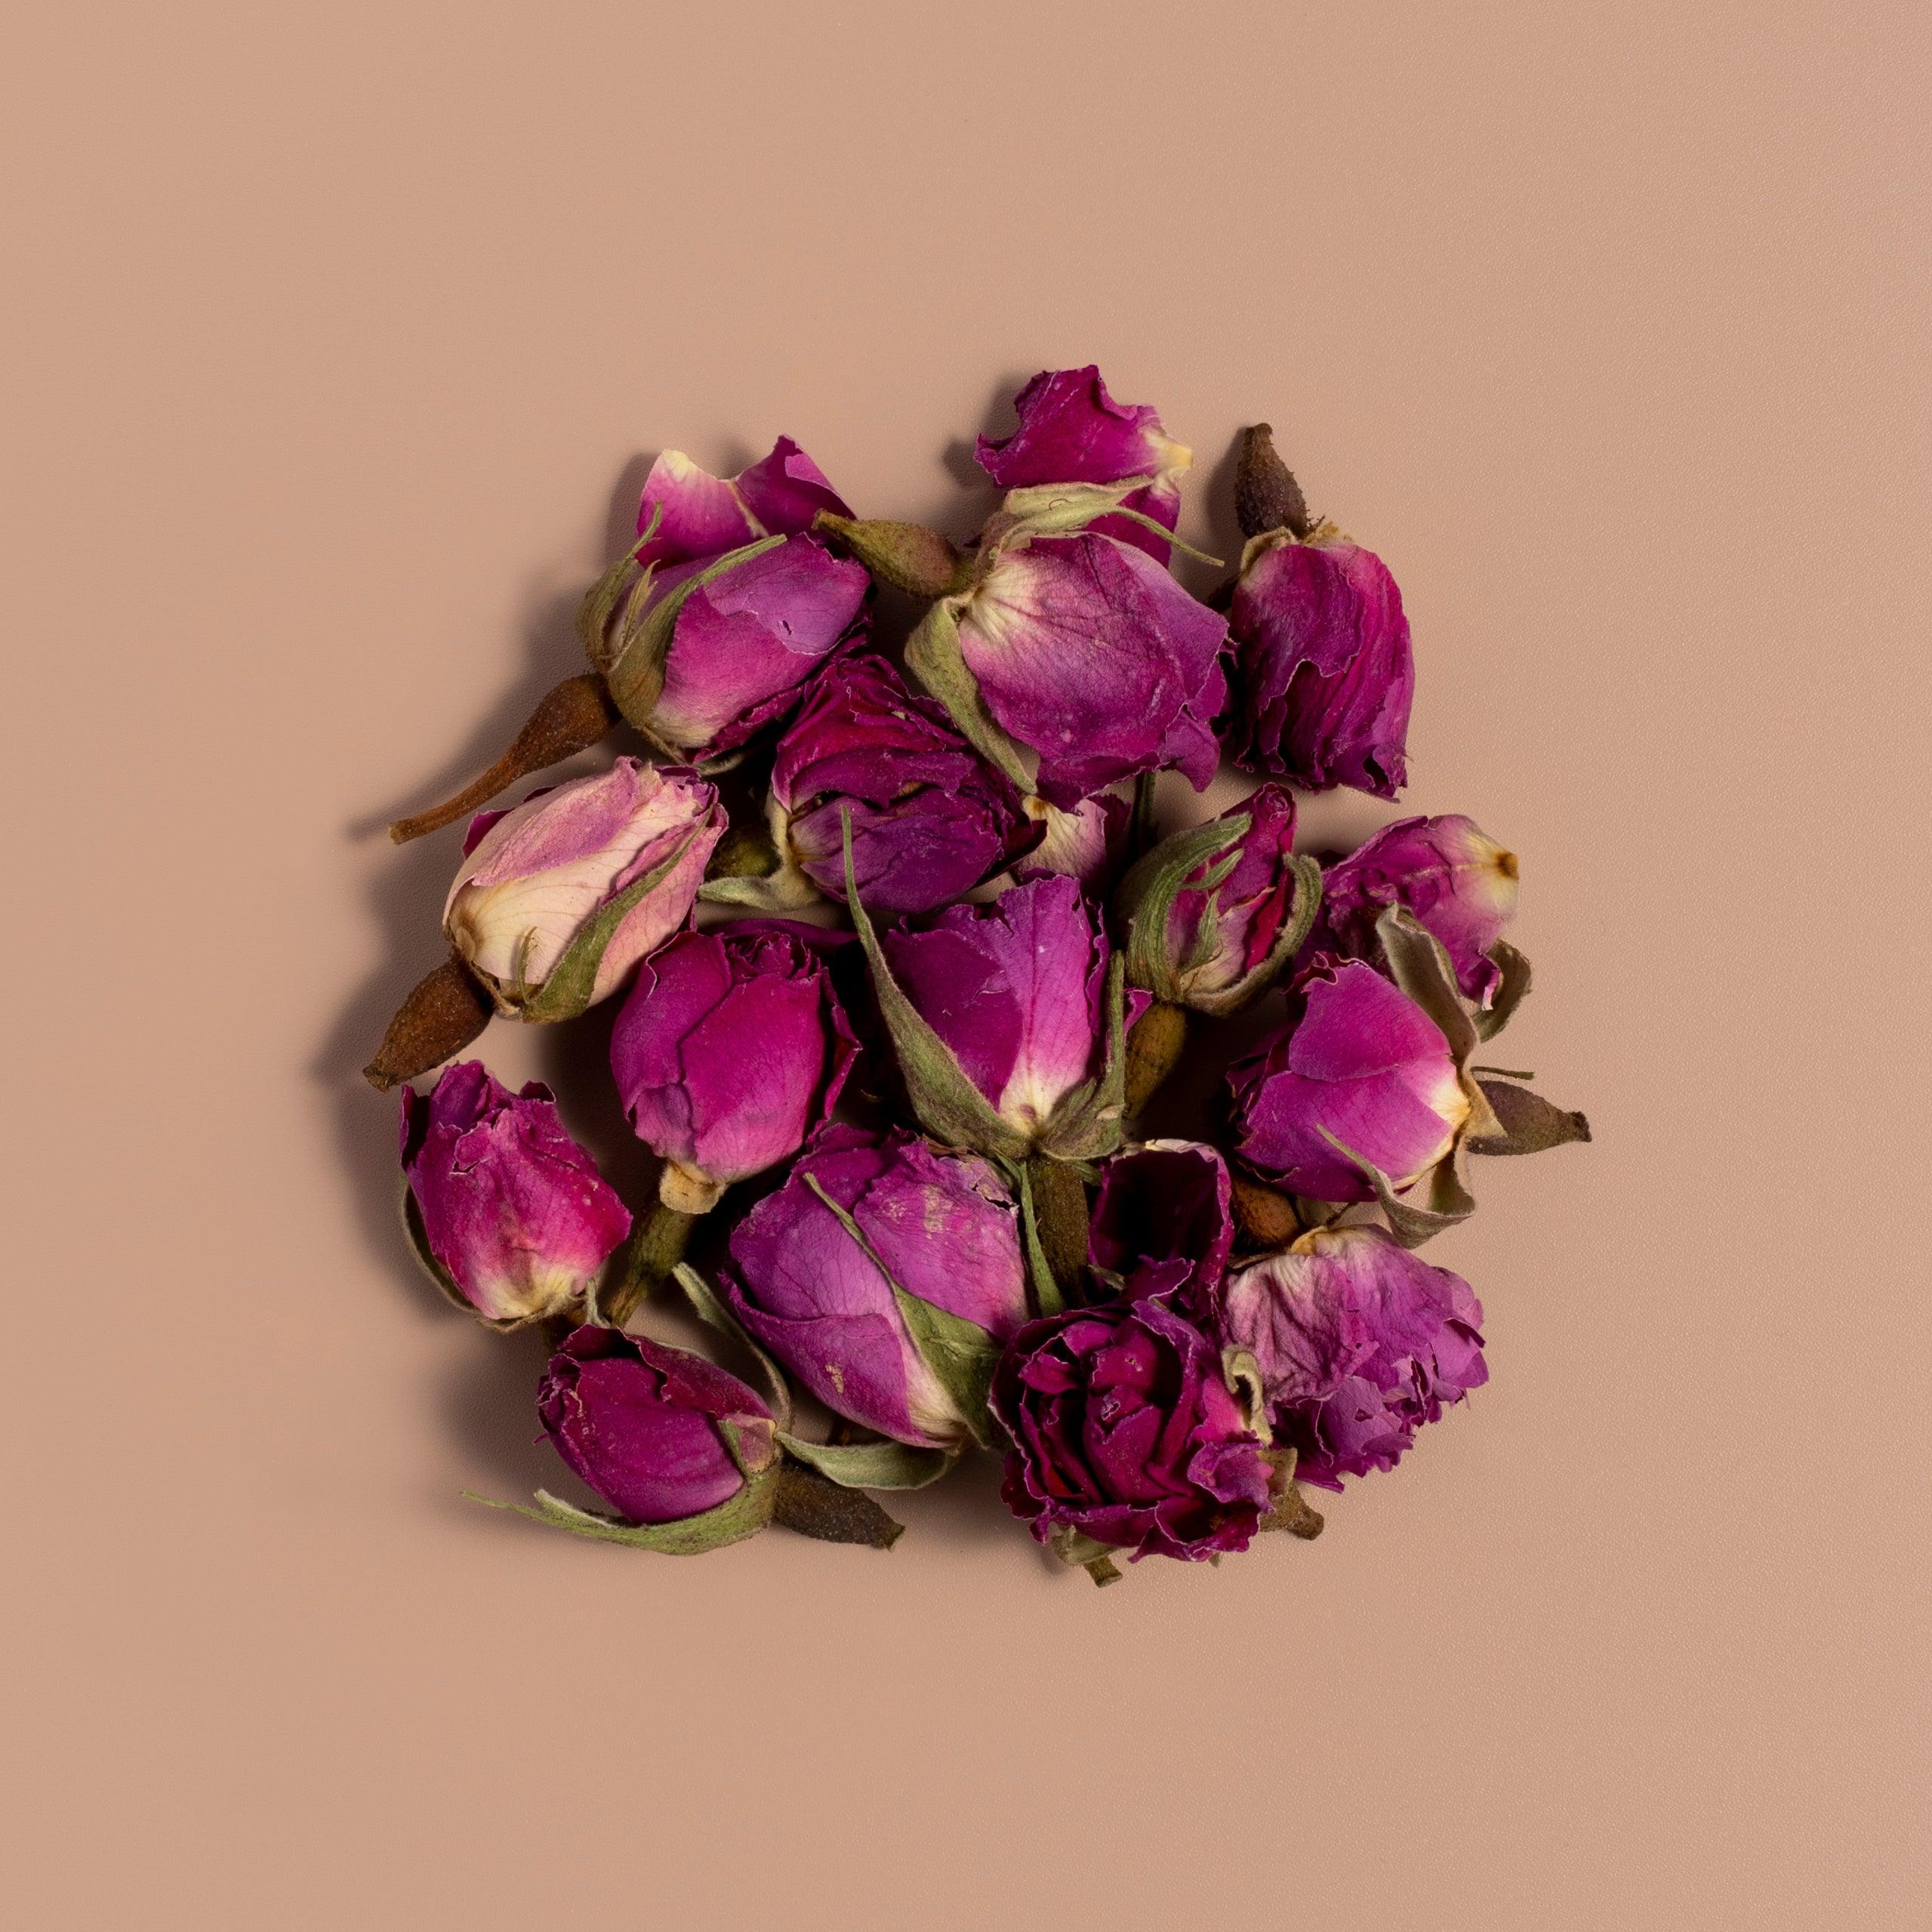 Dried rose buds and dried rose petals used in study